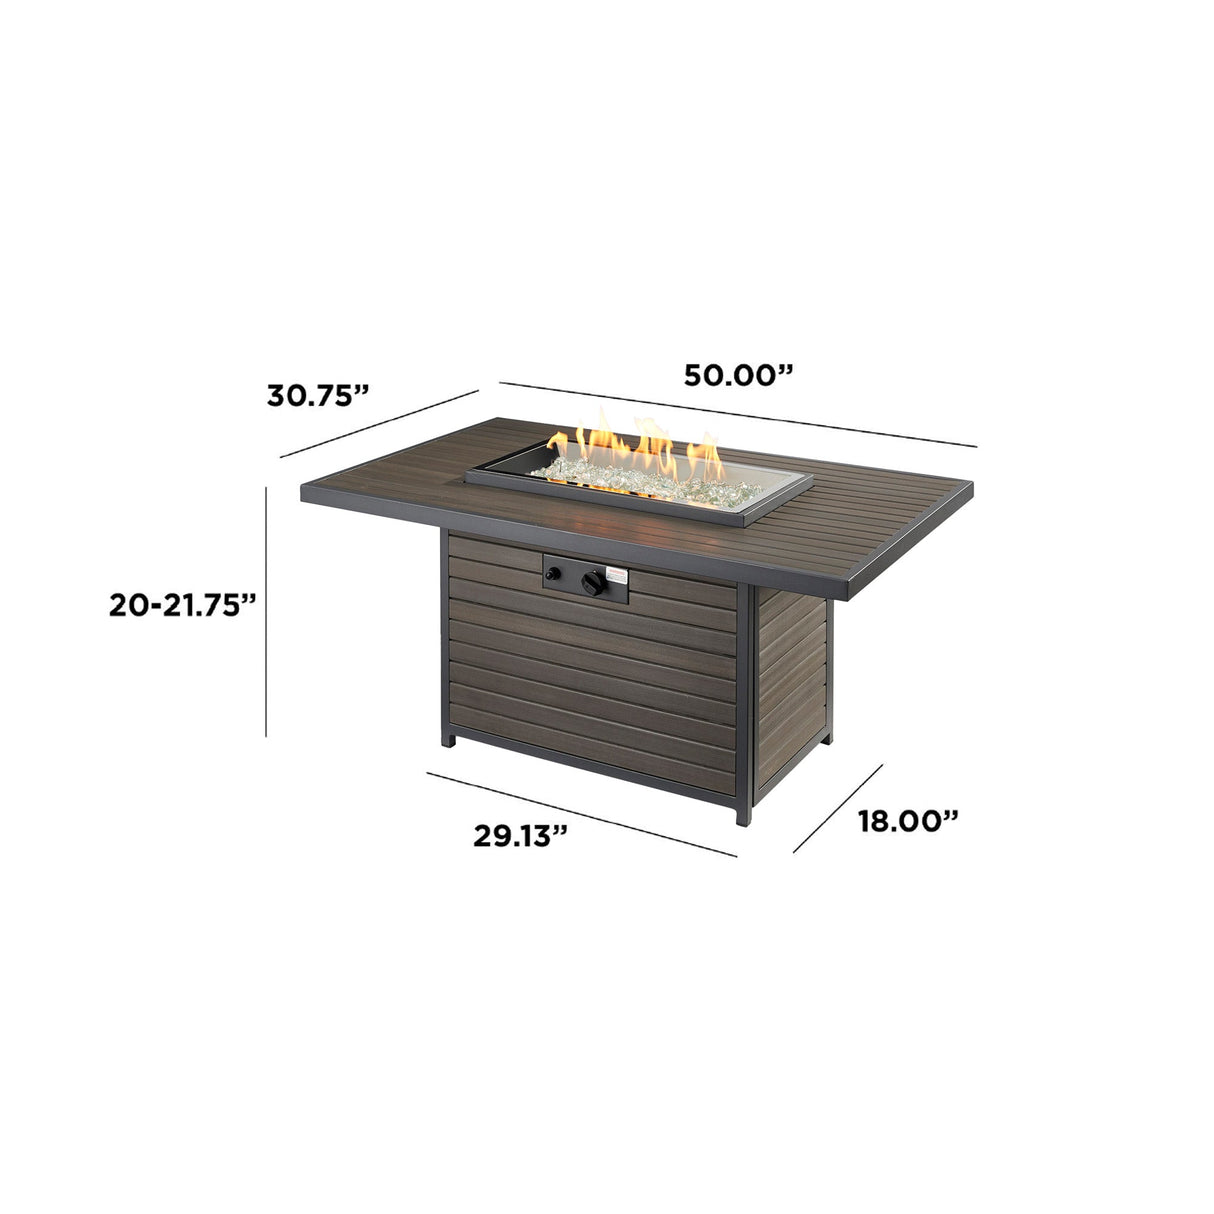 Dimensions overlaid on a Brooks Rectangular Gas Fire Pit Table